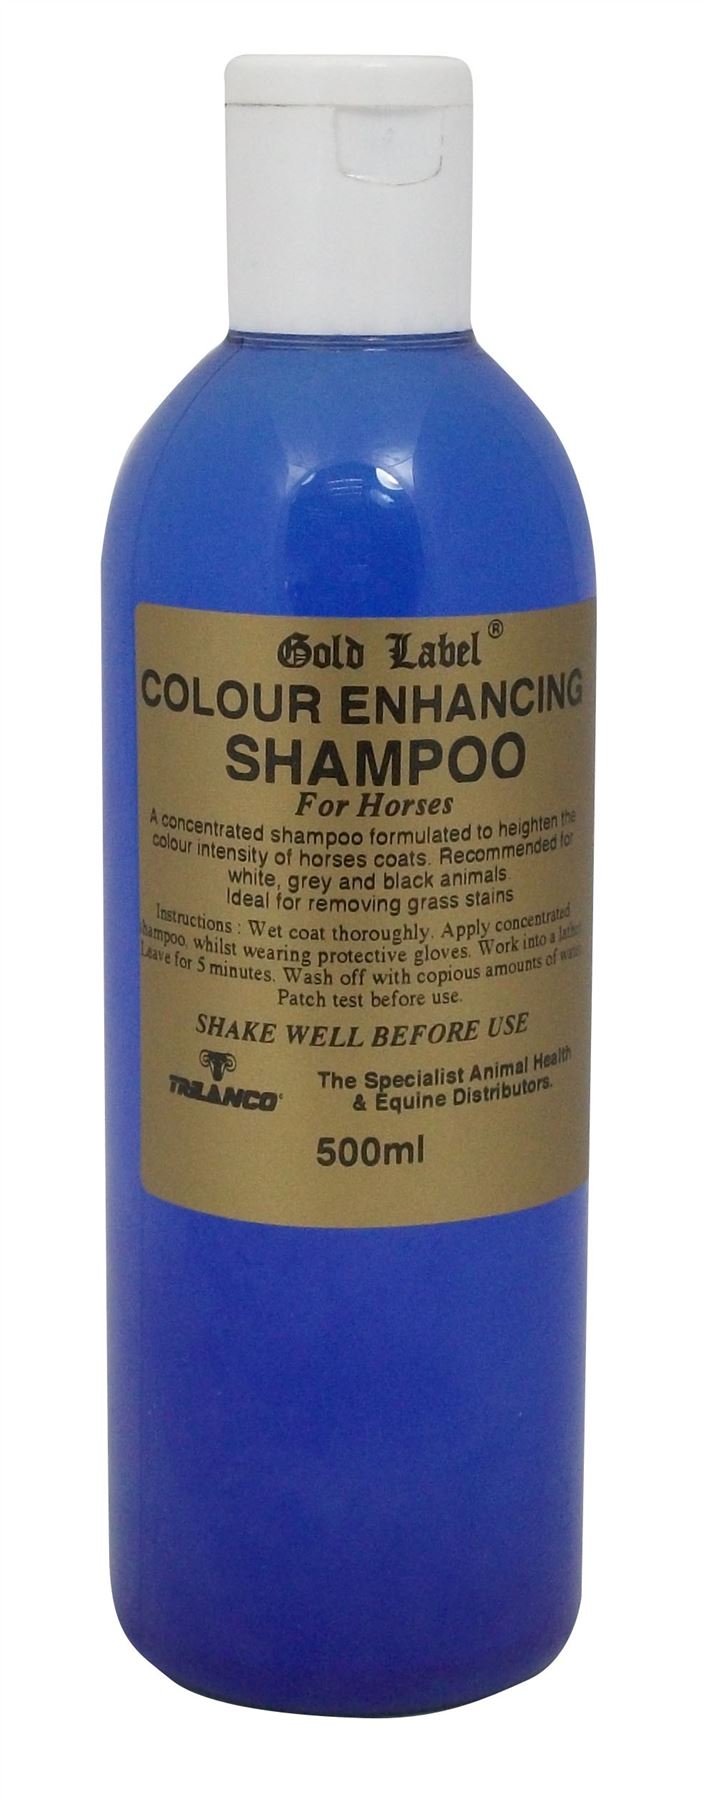 Gold Label Colour Enhancing Shampoo - Just Horse Riders